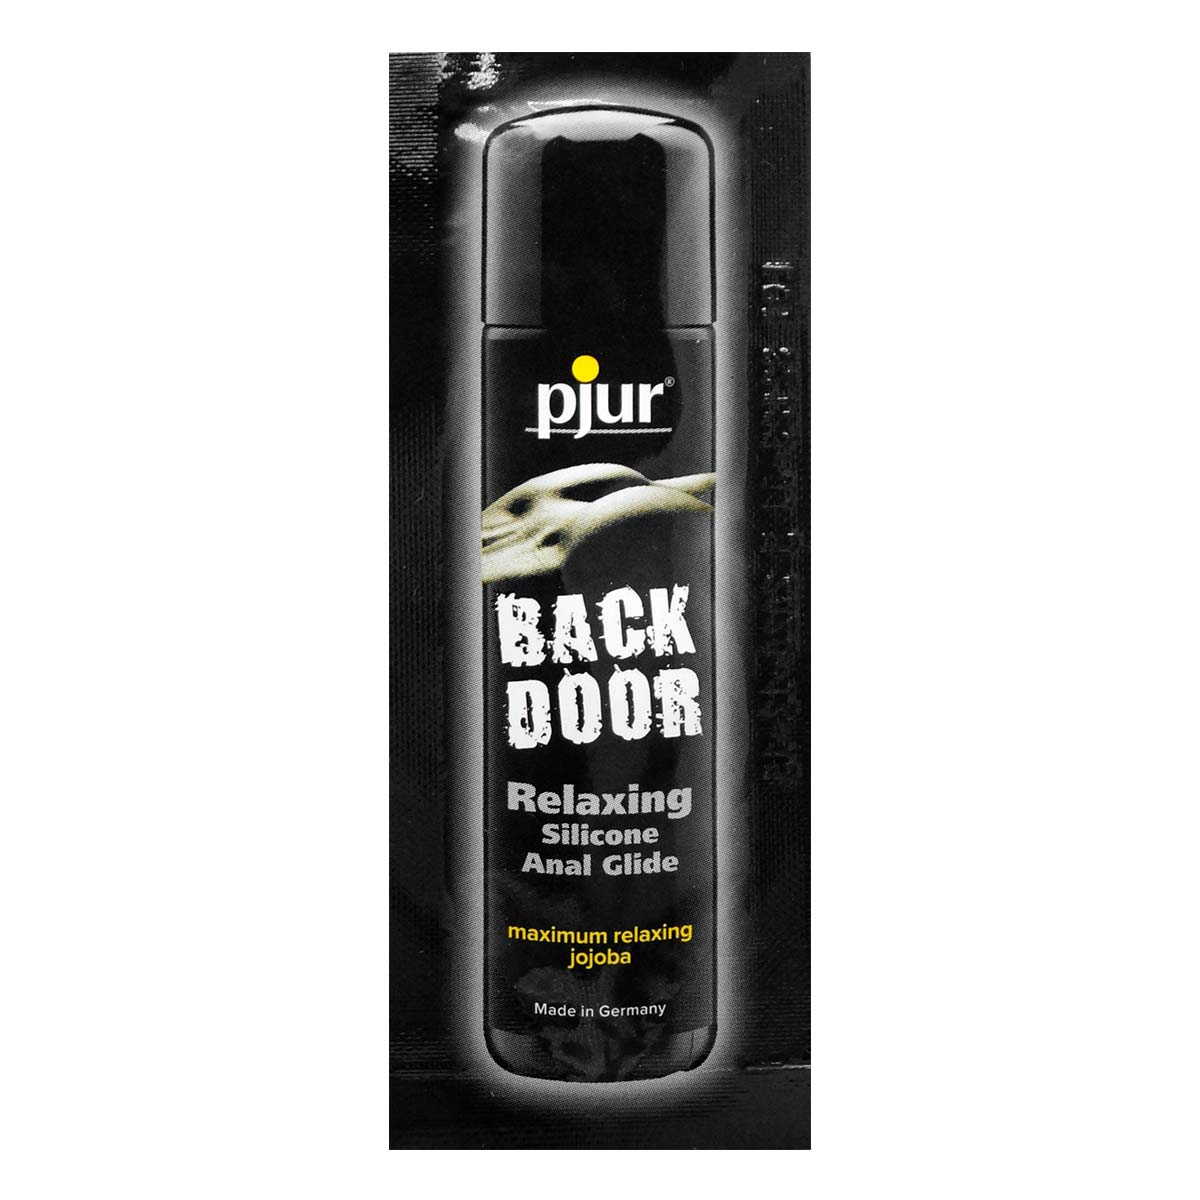 pjur BACK DOOR RELAXING Silicone Anal Glide 1.5ml Silicone-based Lubricant-p_2